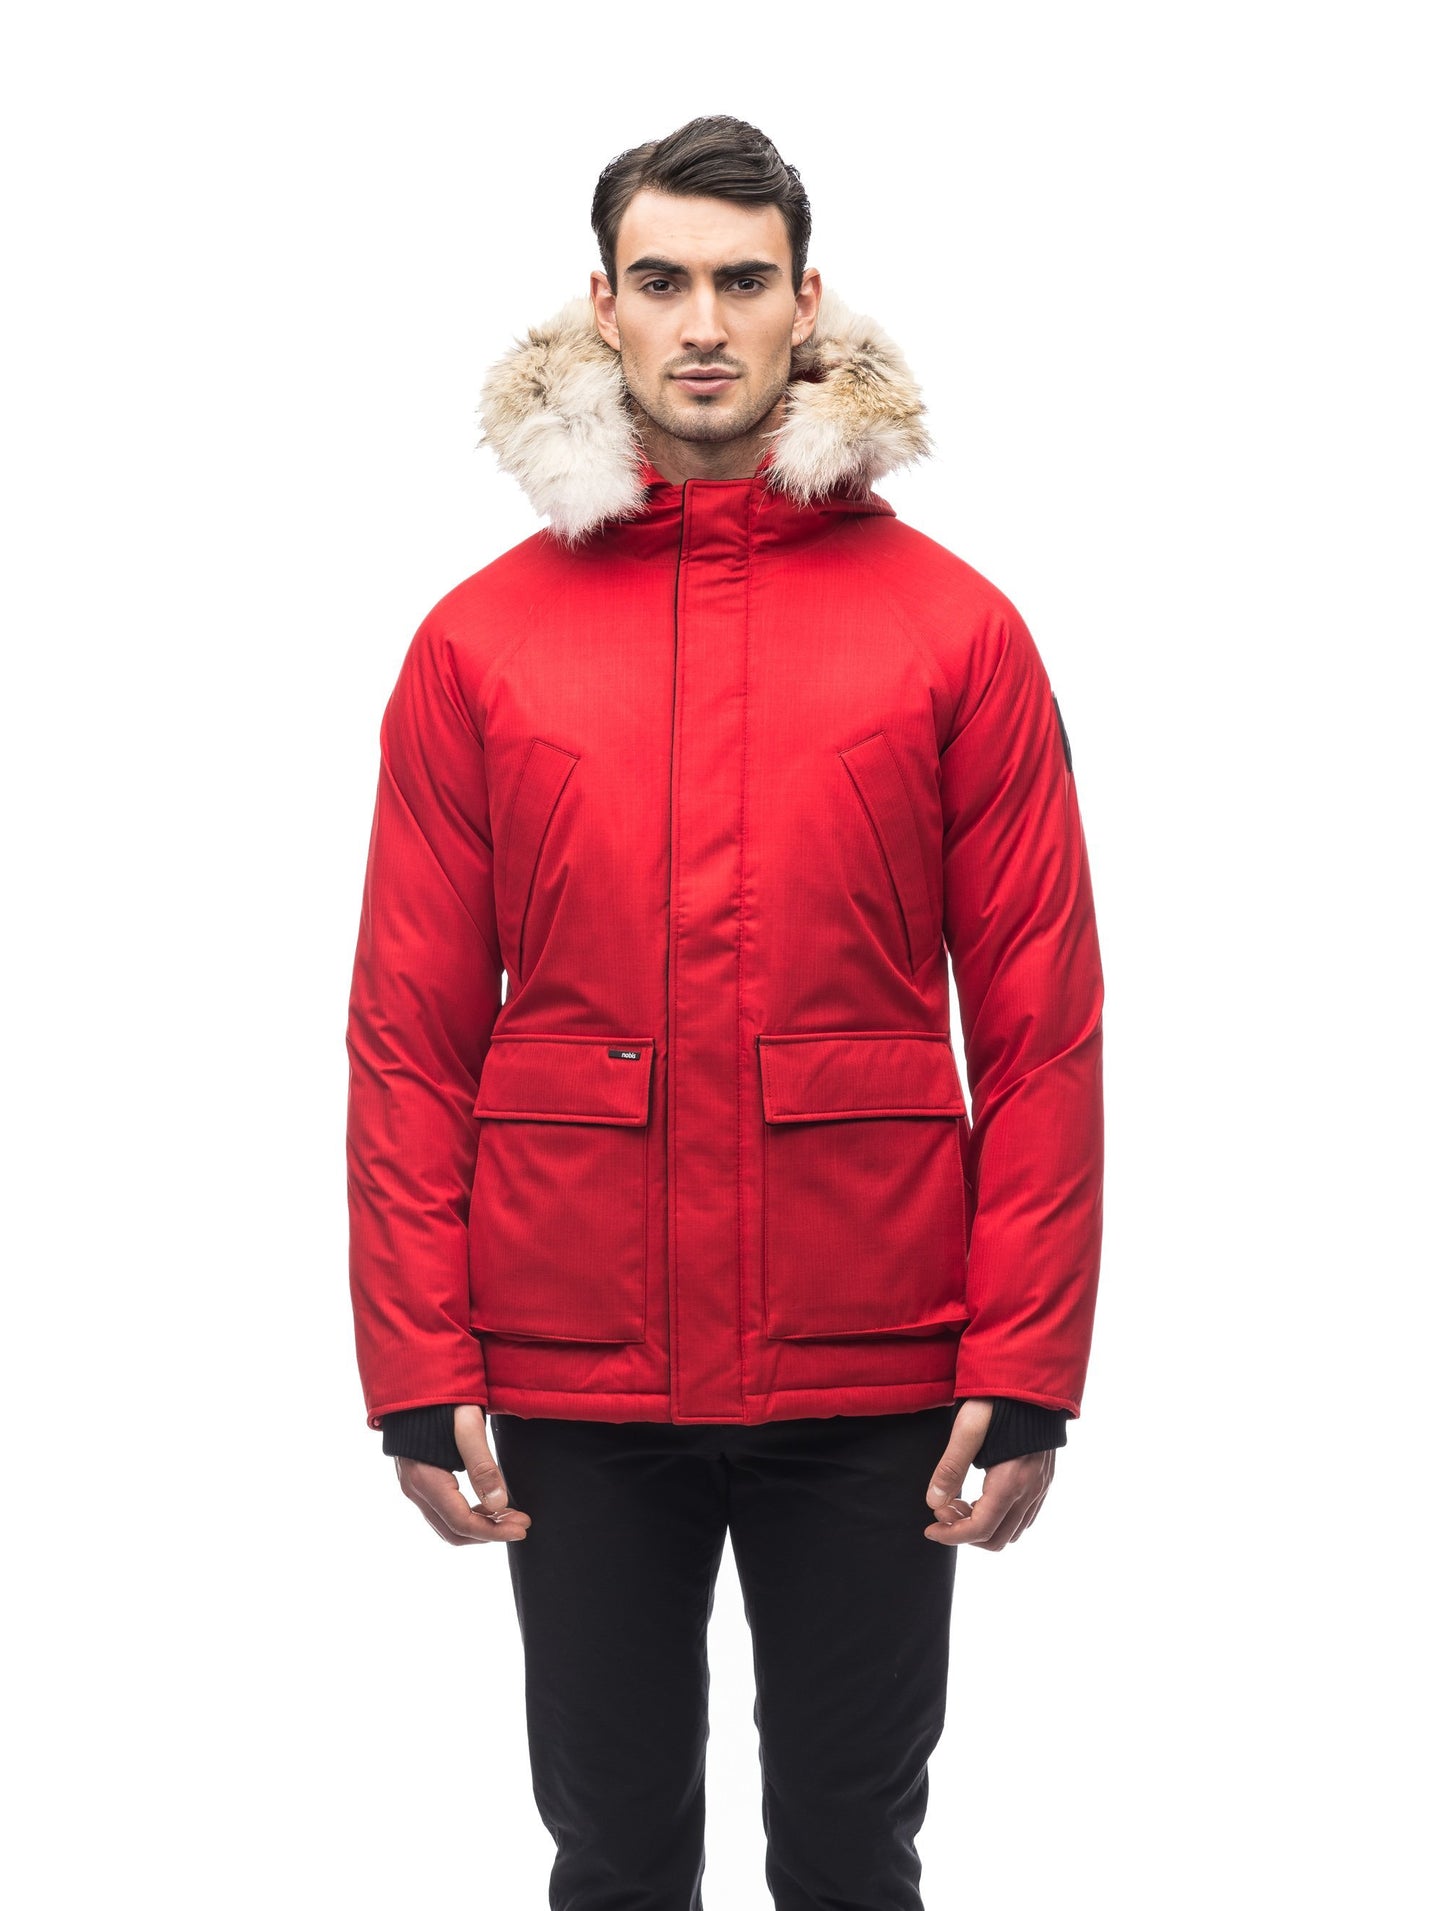 Men's waist length down filled jacket with two front pockets with magnetic closure and a removable fur trim on the hood in CH Red